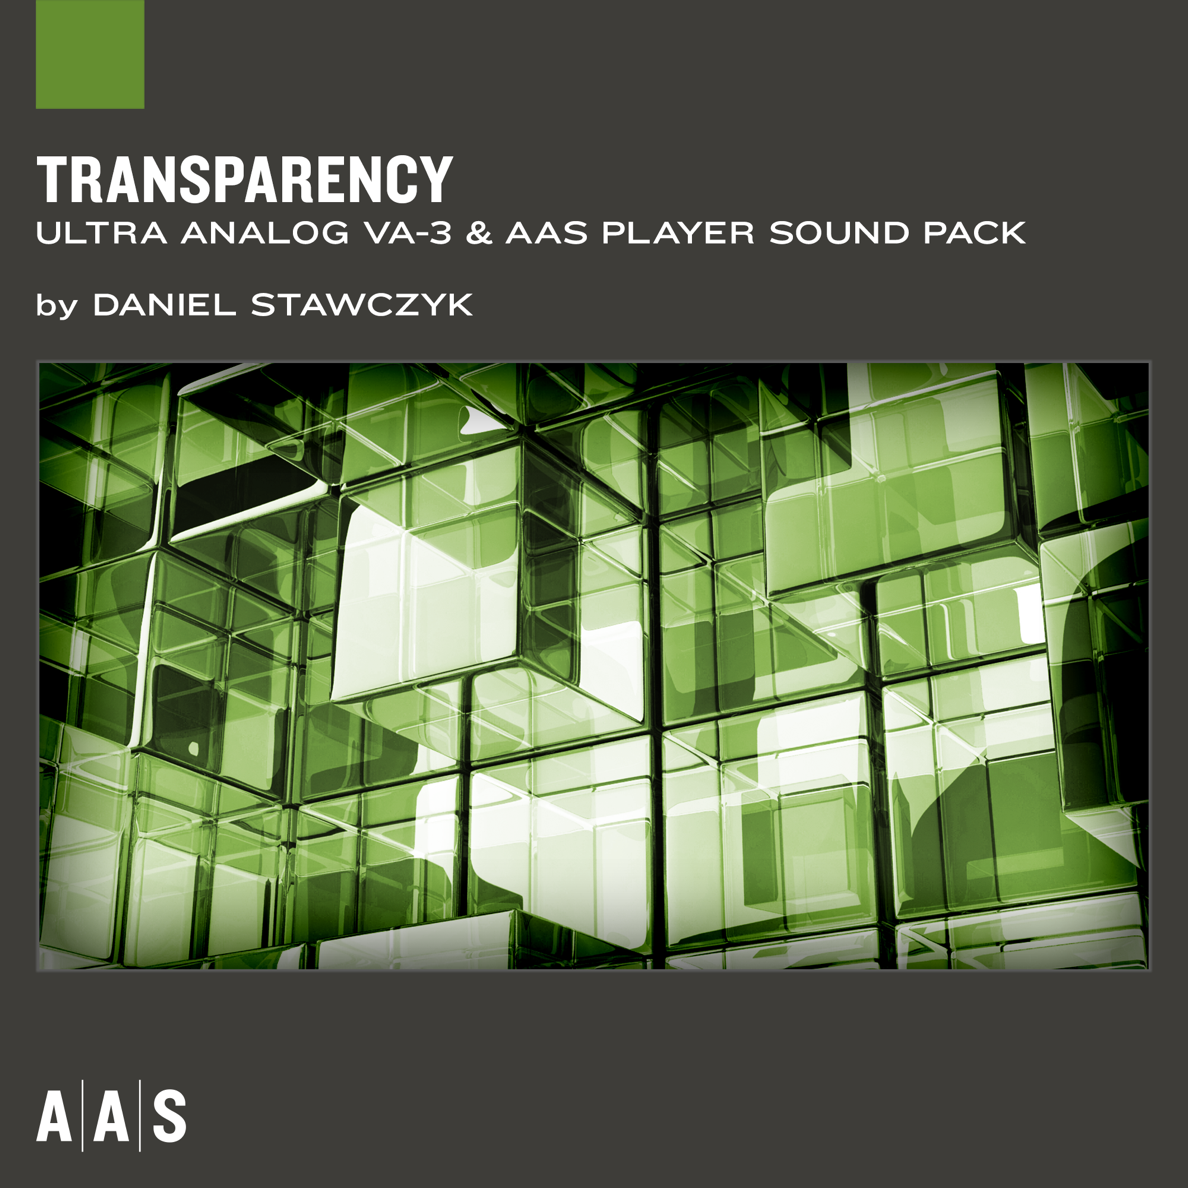 Ultra Analog and AAS Player sound pack ： Transparency